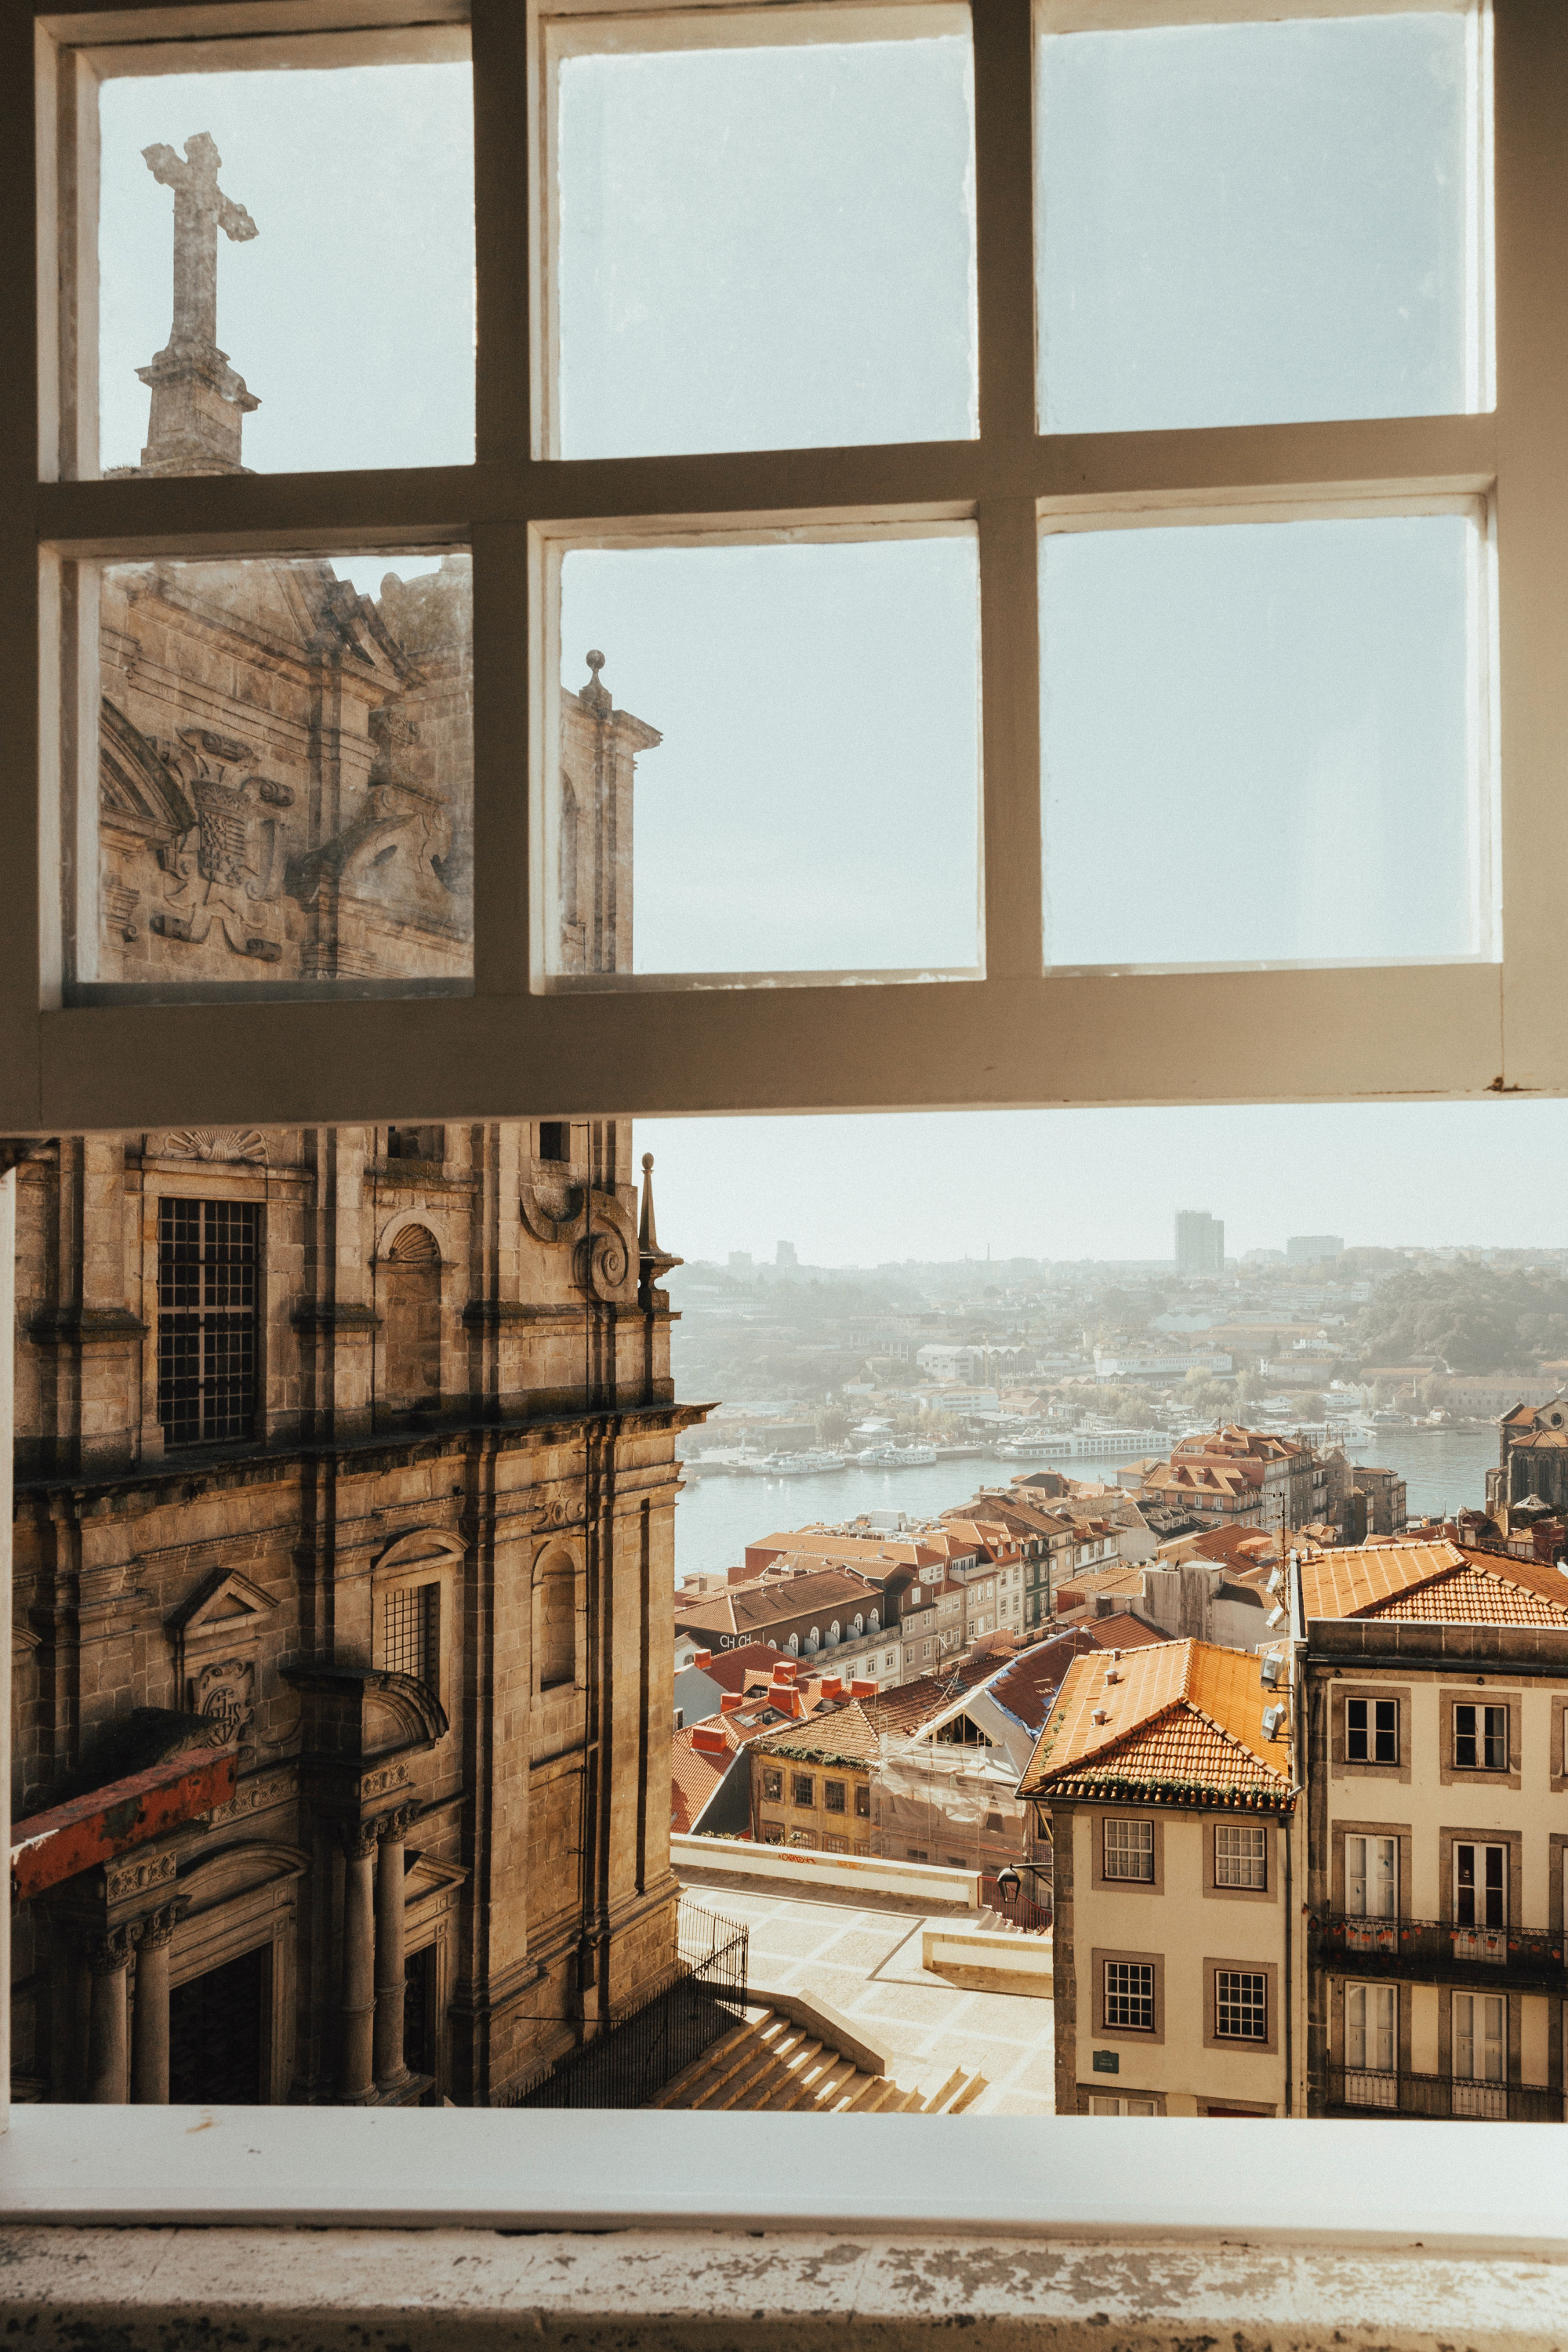 How To Get A Golden Visa In Portugal